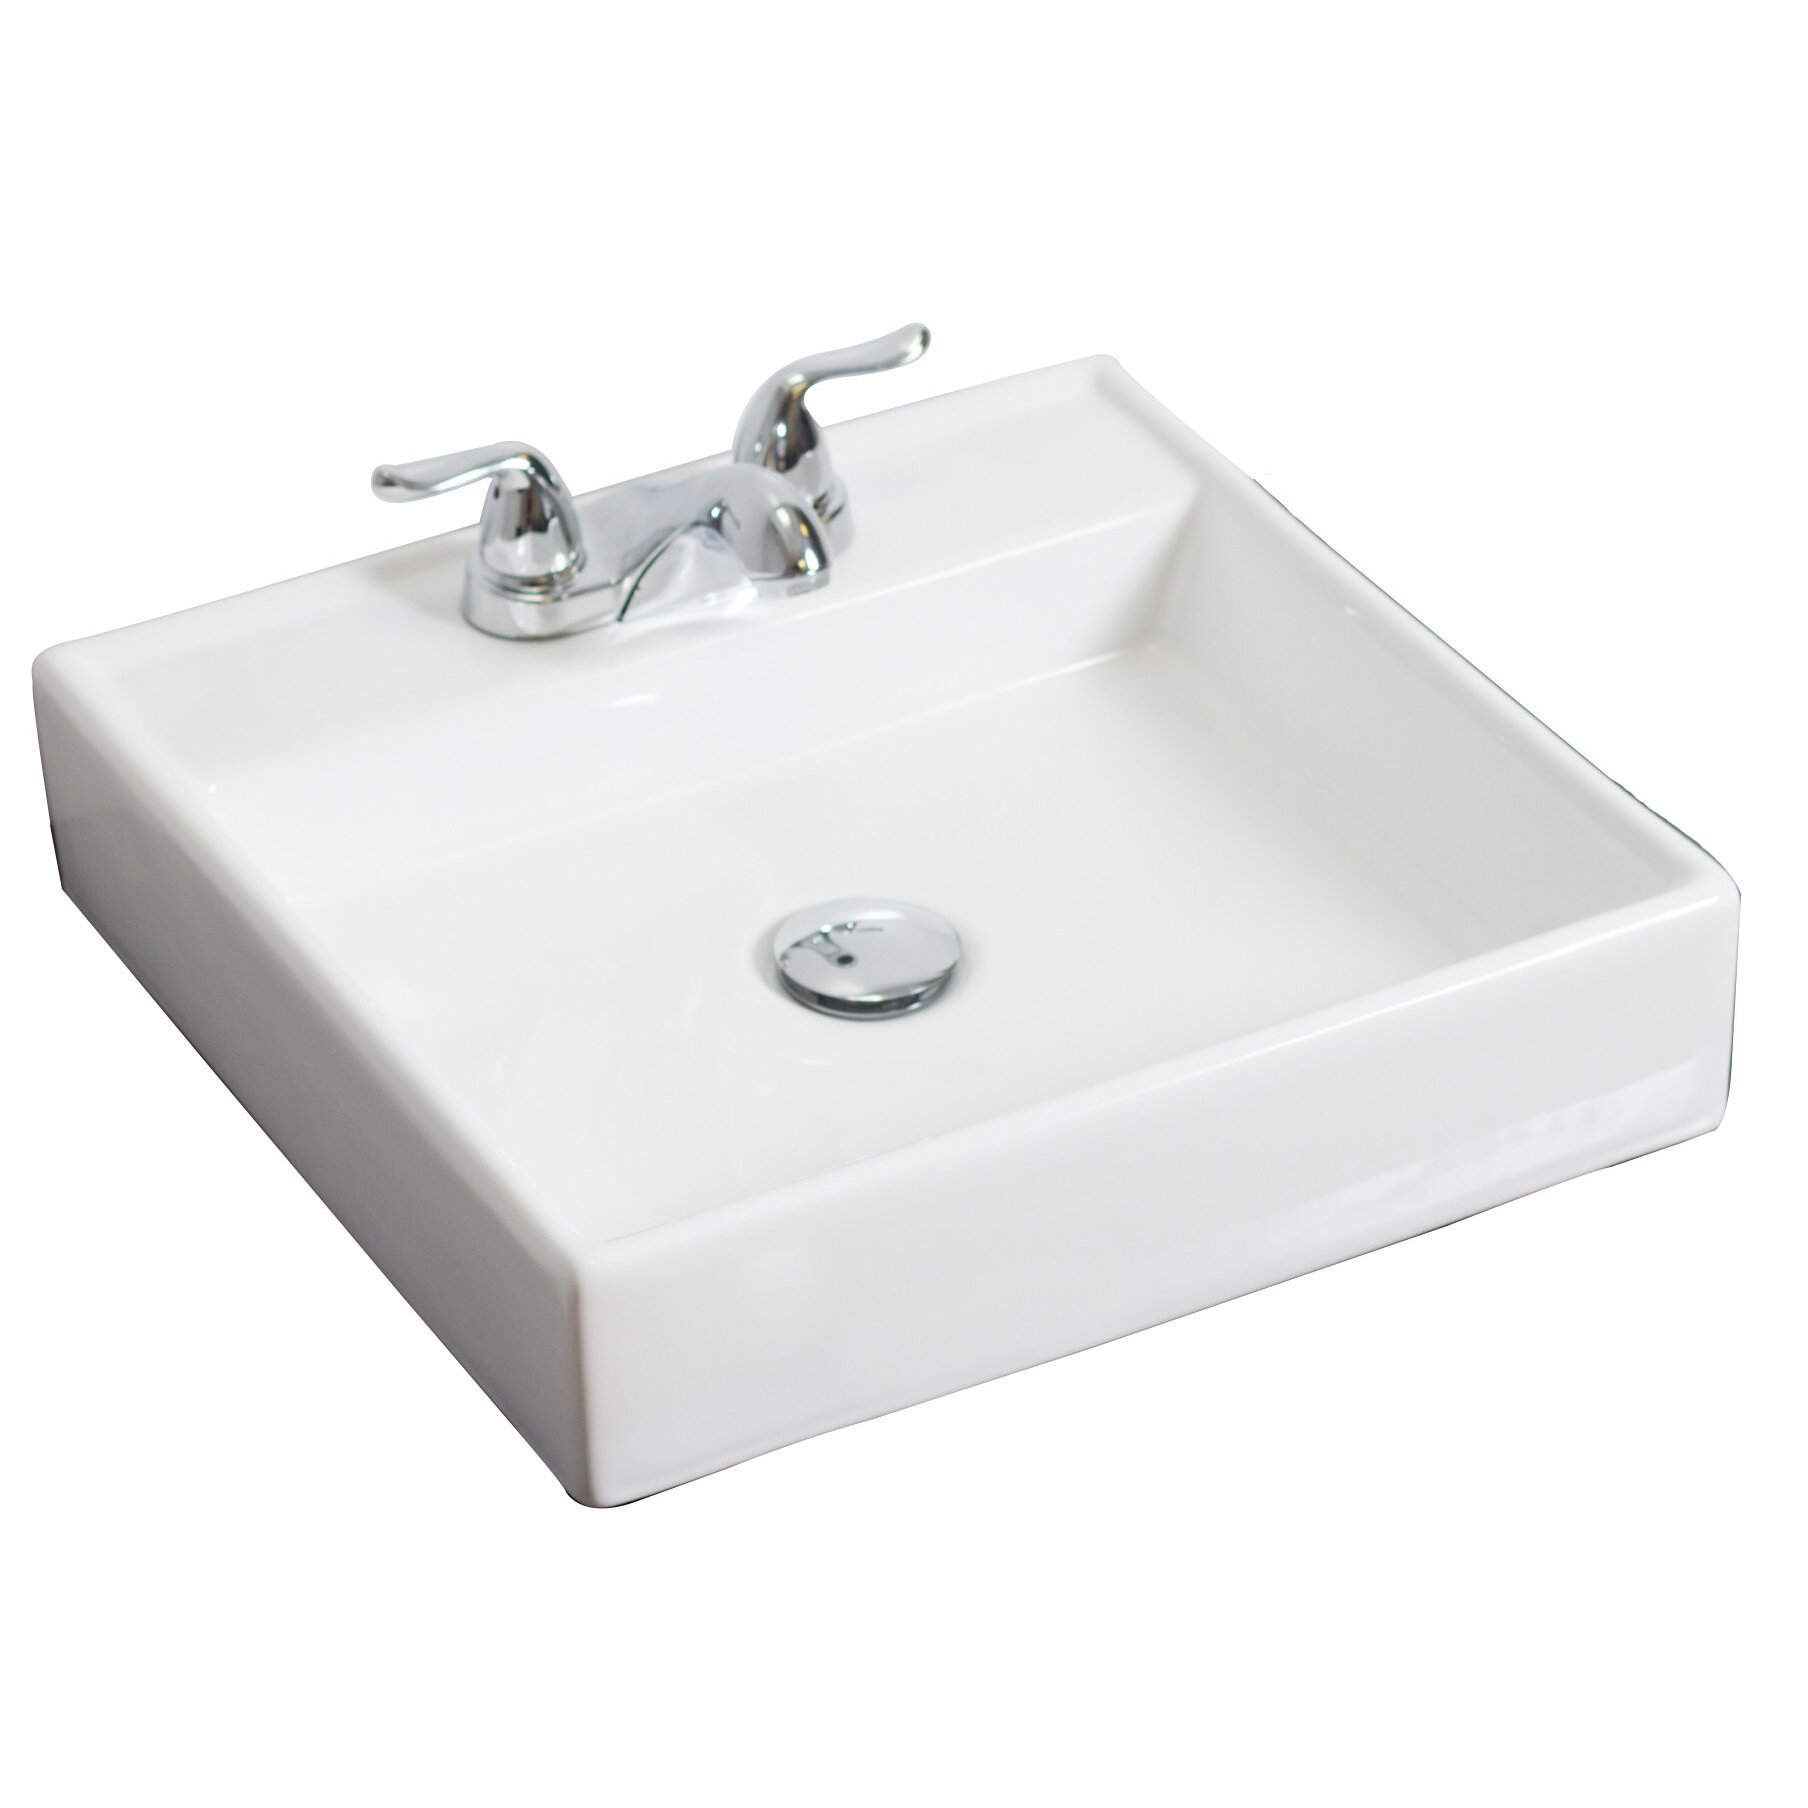 Bathroom Sink Counter above counter rectangle vessel